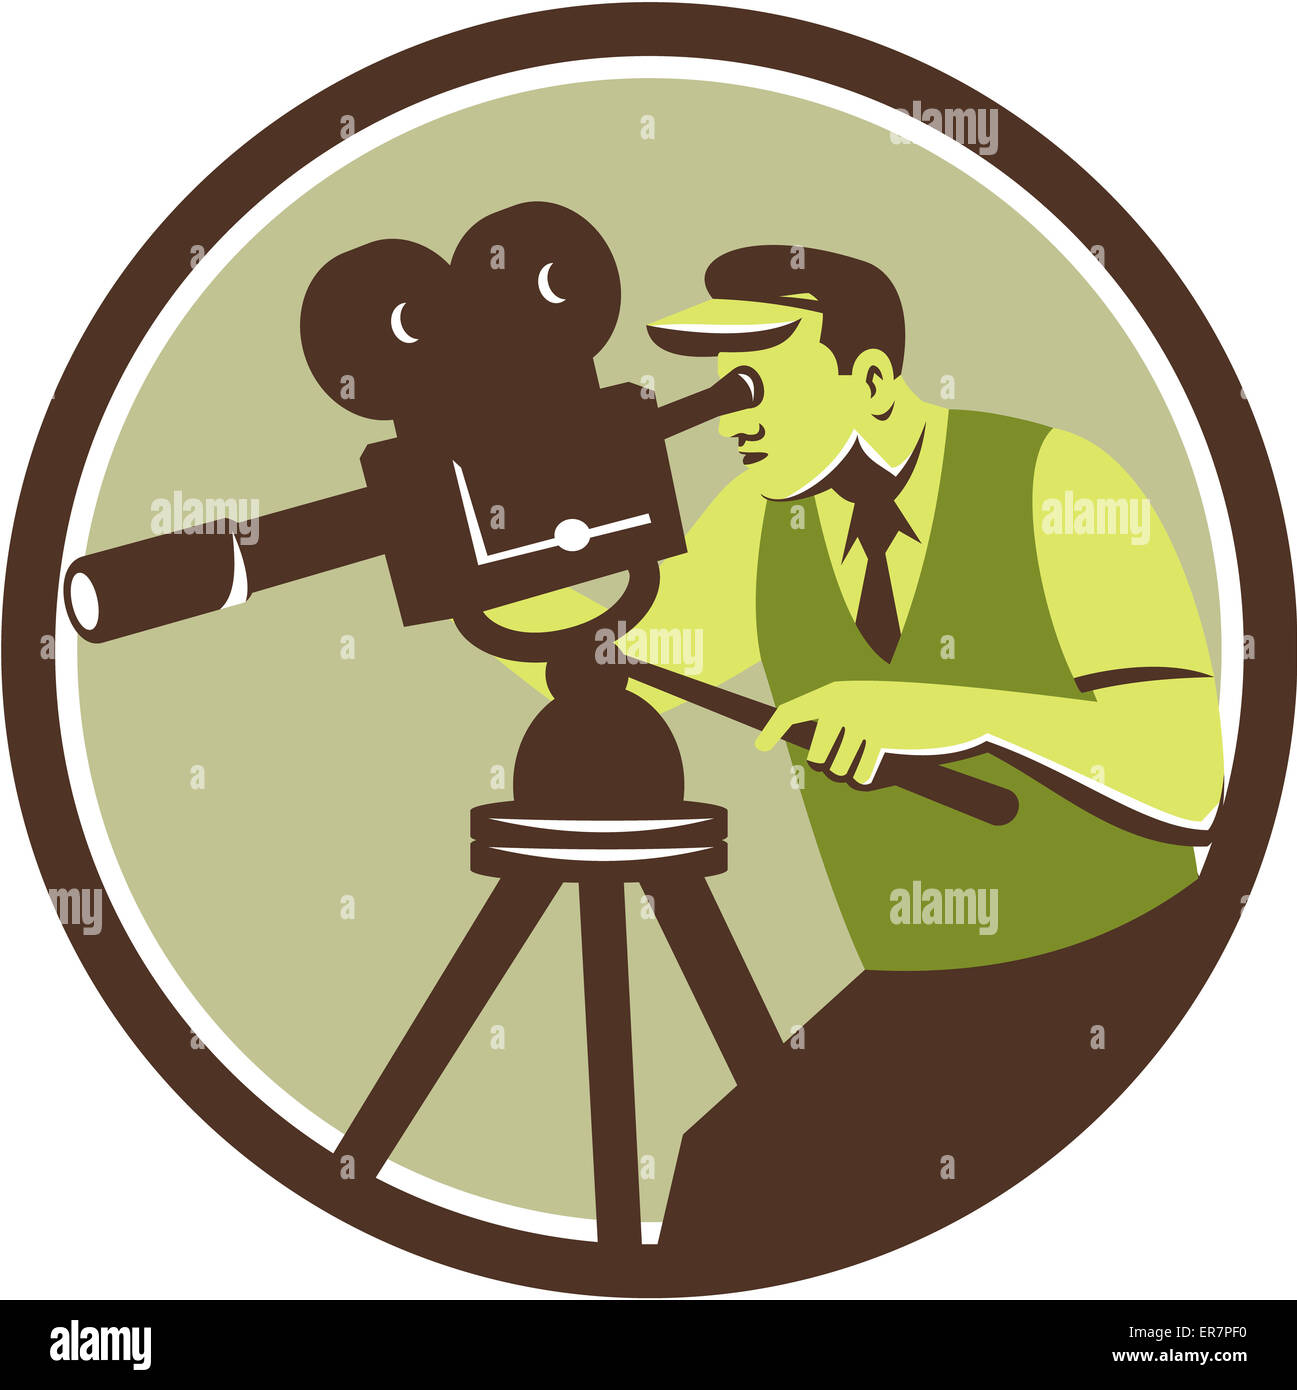 Illustration of a cameraman movie director with vintage camera filming shooting looking into lens viewed from the side set inside circle done in retro style. Stock Photo